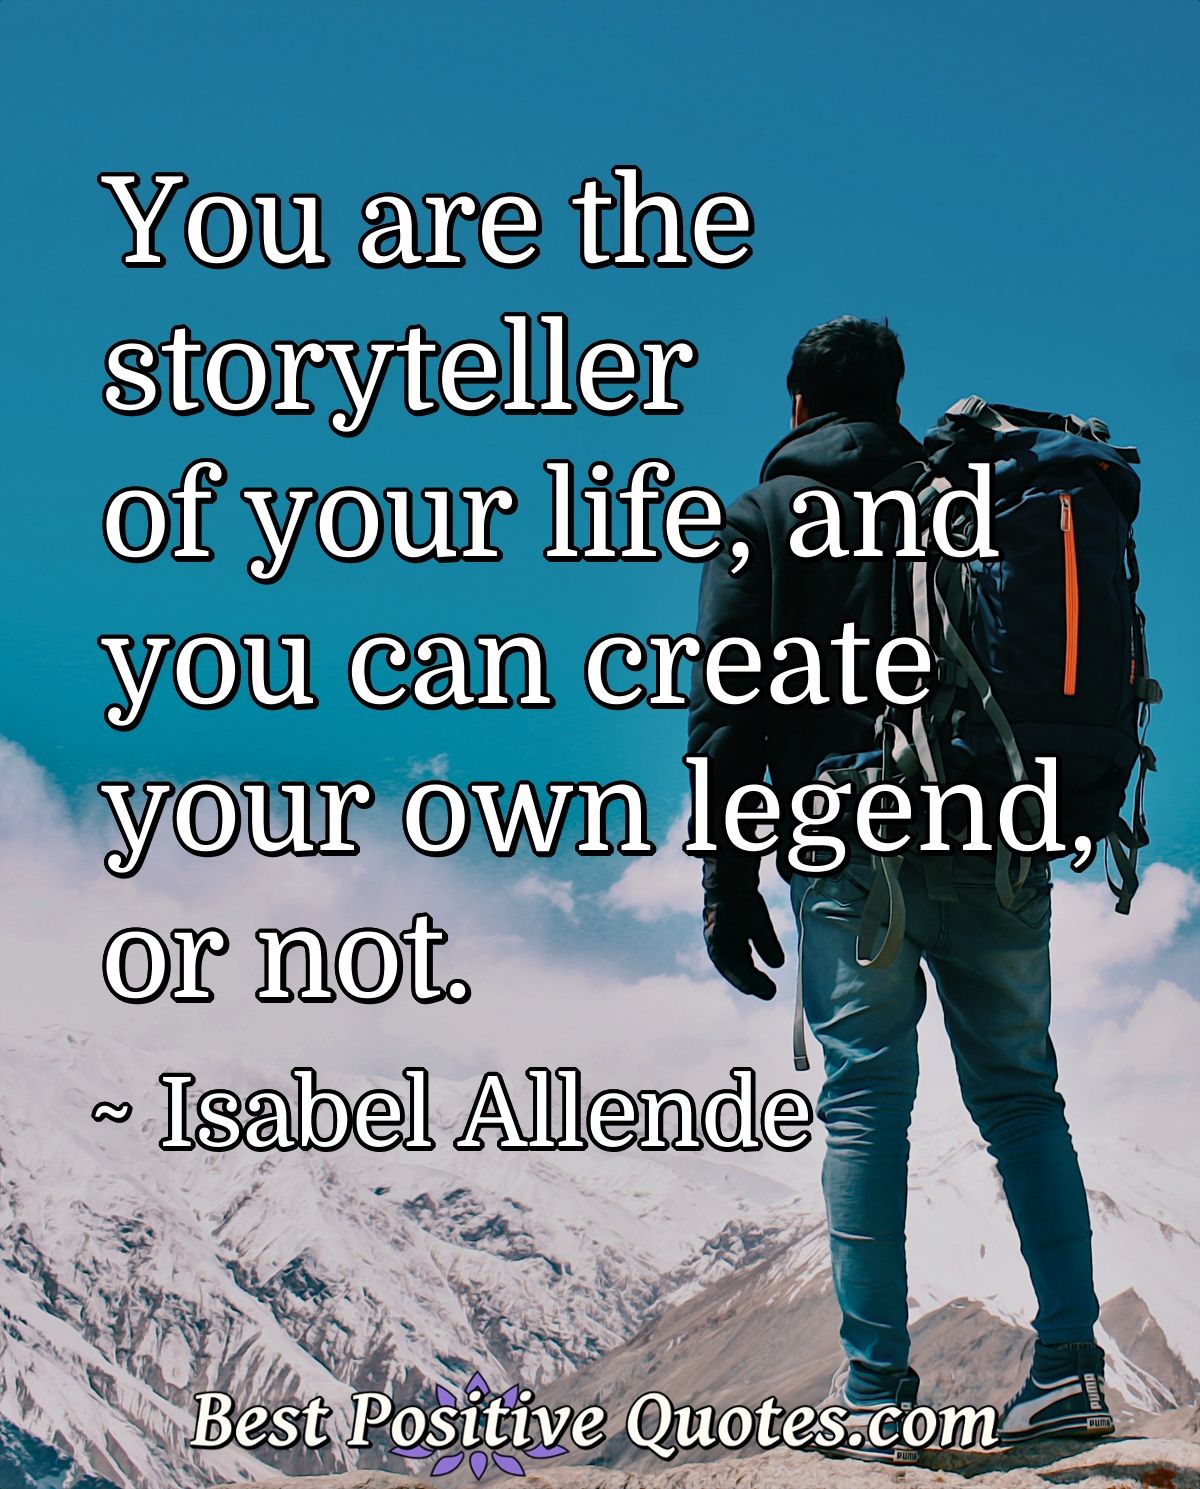 You are the storyteller of your life, and you can create your own legend, or not. - Isabel Allende